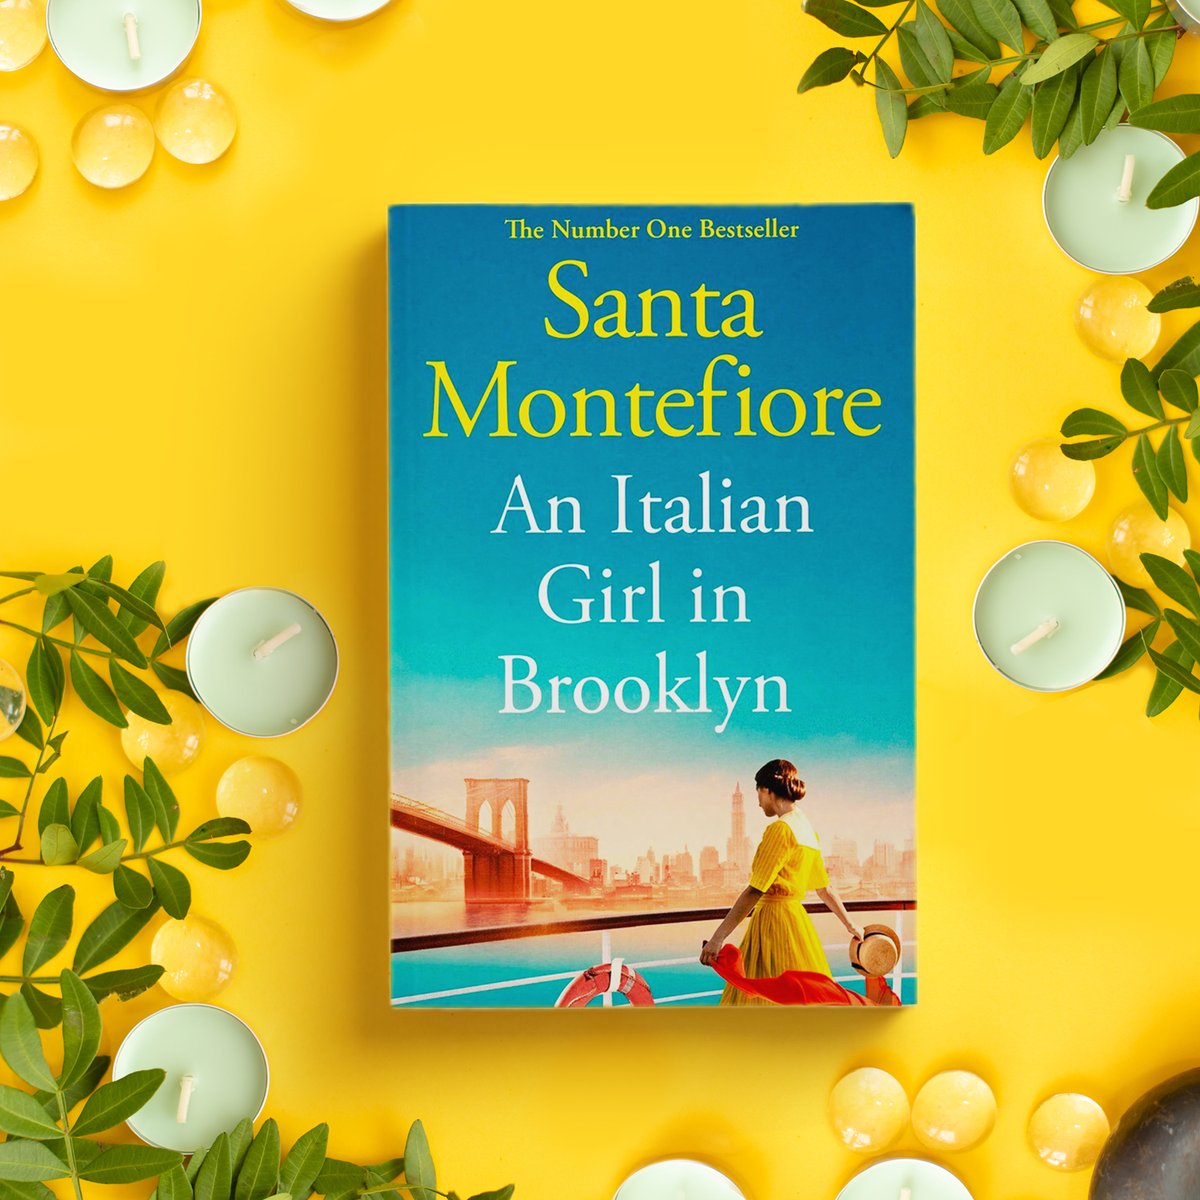 #AnItalianGirlinBrooklyn by @santamontefiore is an epic story of new beginnings and dark secrets that will transport you from rural Italy to the streets of New York. Out now in stunning paperback